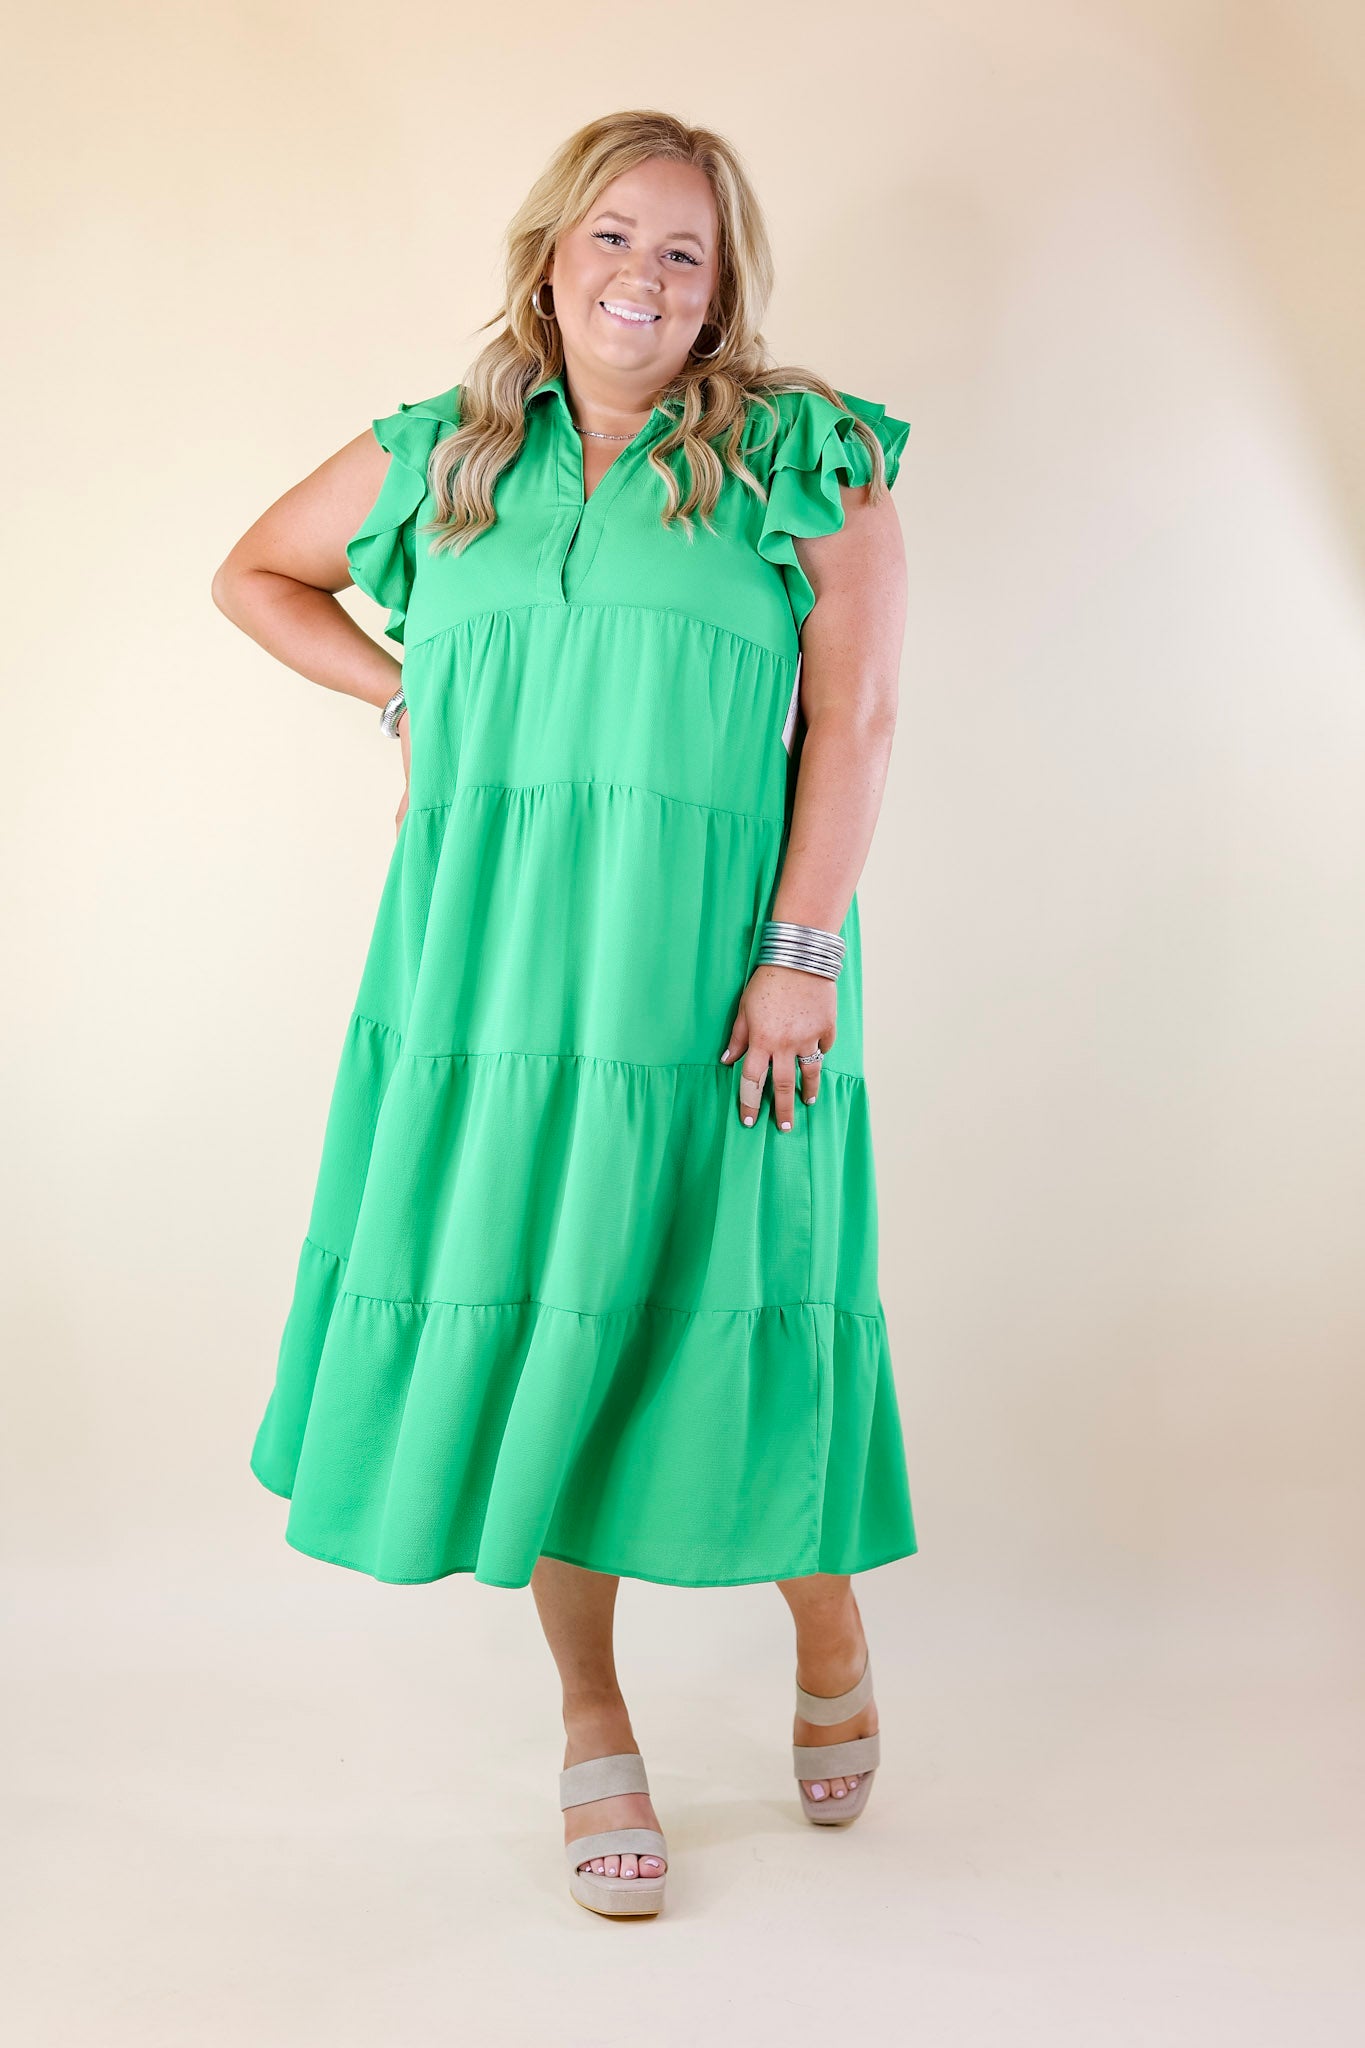 All Of A Sudden Tiered Midi Dress with Ruffle Cap Sleeves in Green - Giddy Up Glamour Boutique